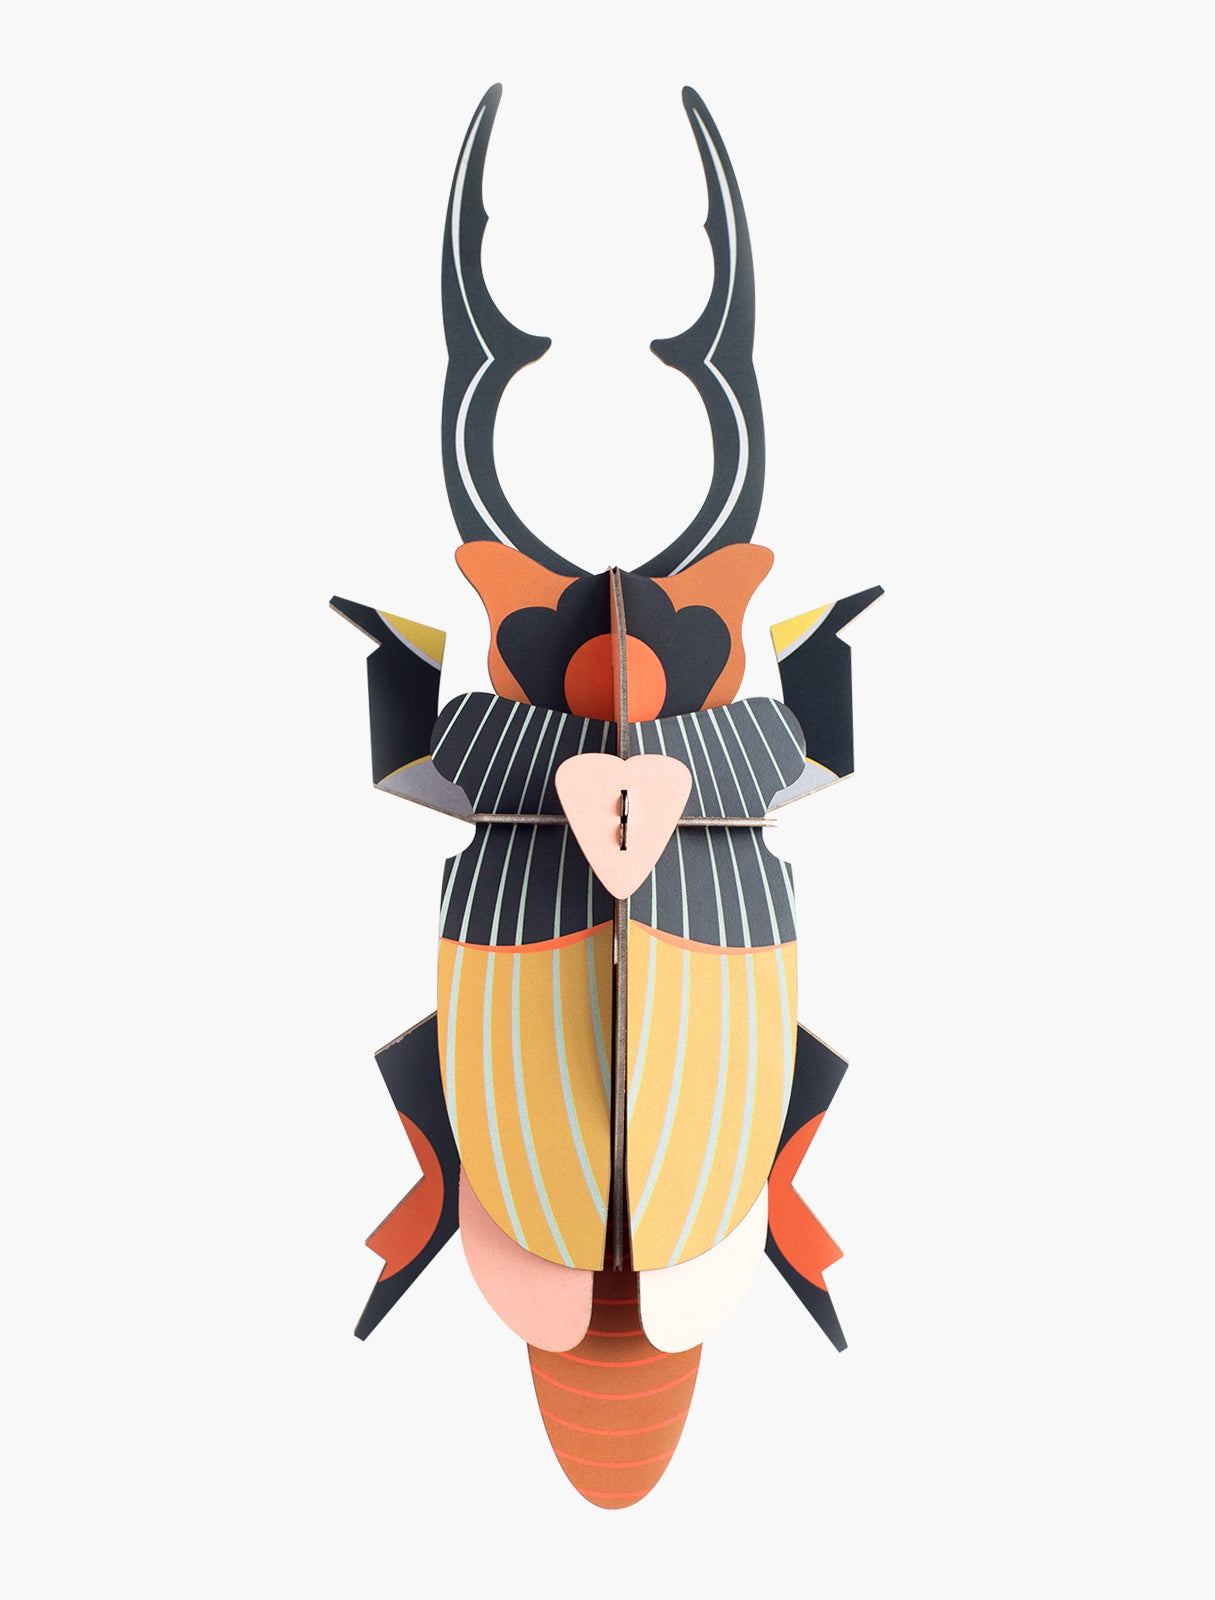 Studio Roof Wall Decor - Large Giant Stag Beetle